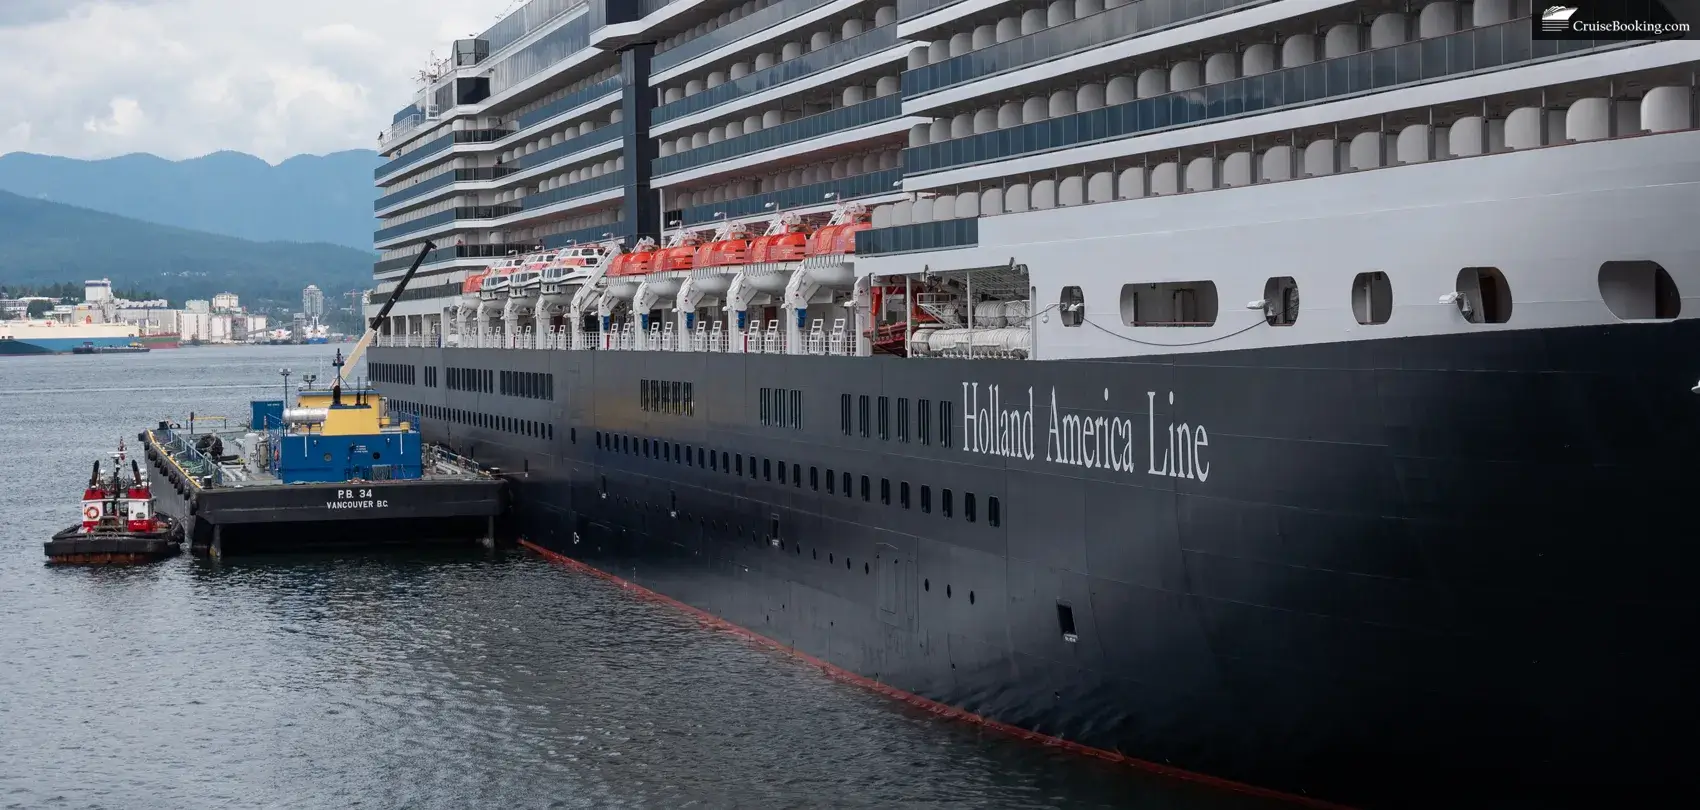 The Holland America Line cruise ship is in port